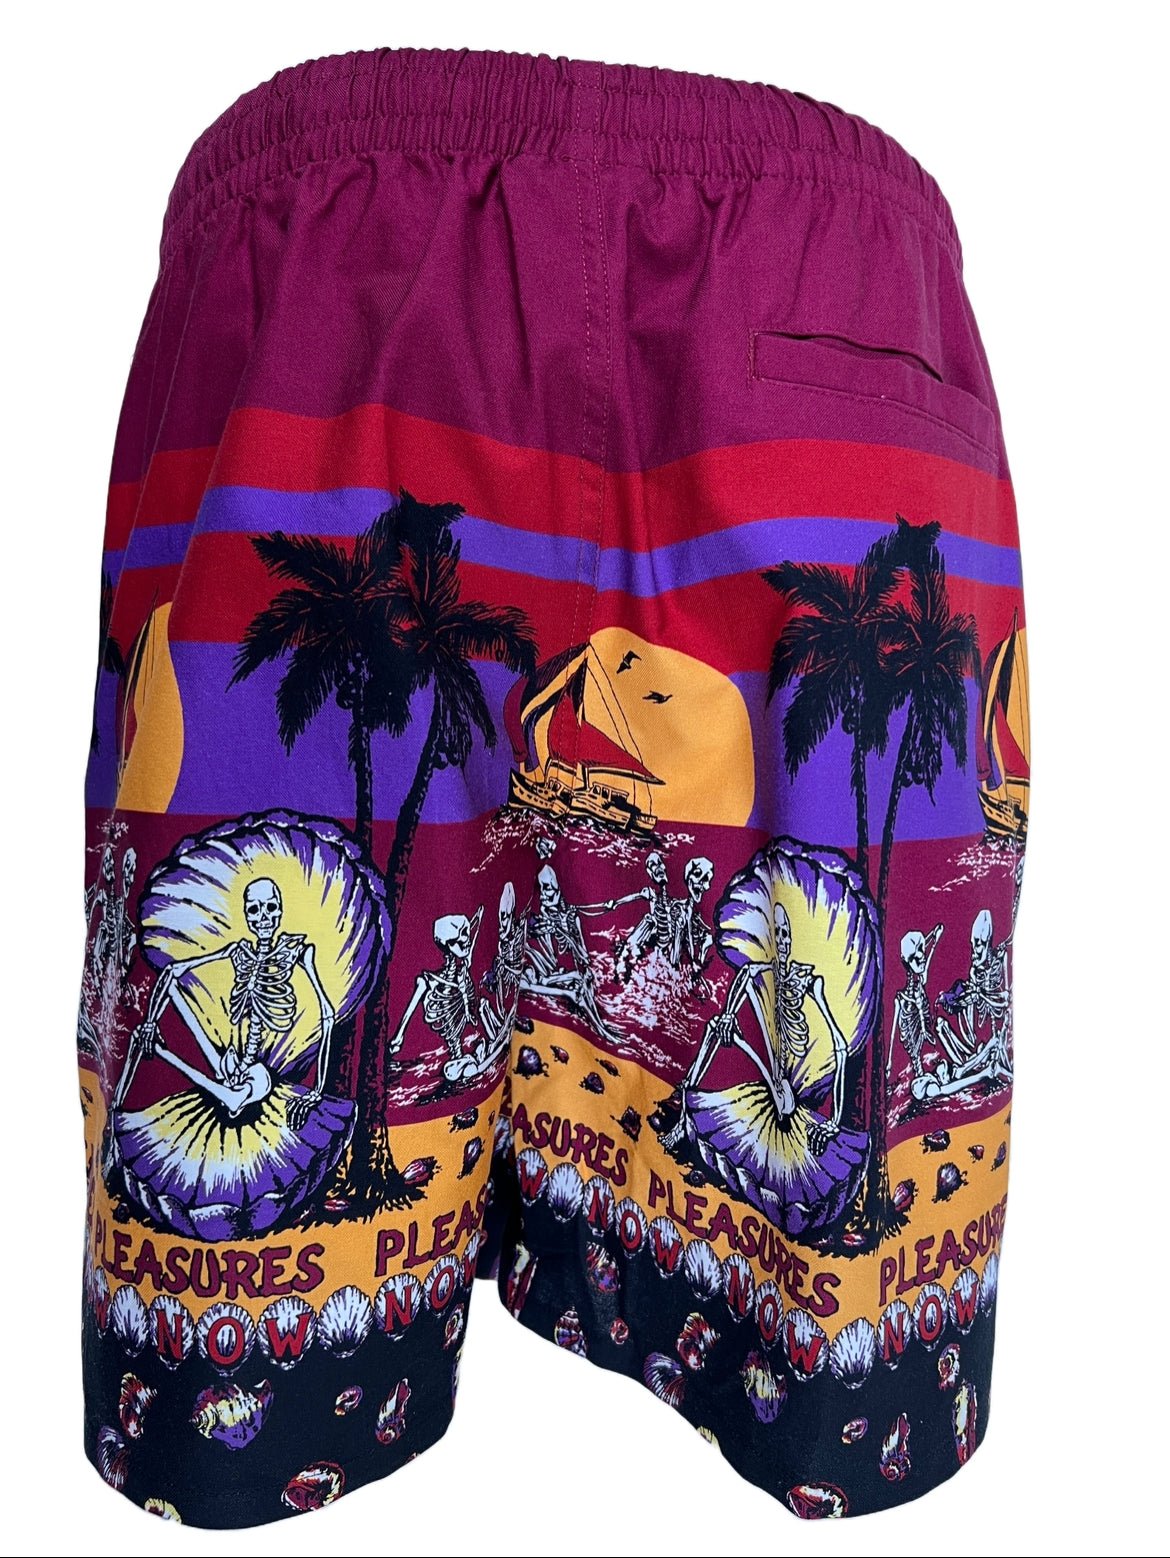 A PLEASURES swim shorts with palm trees print on it.